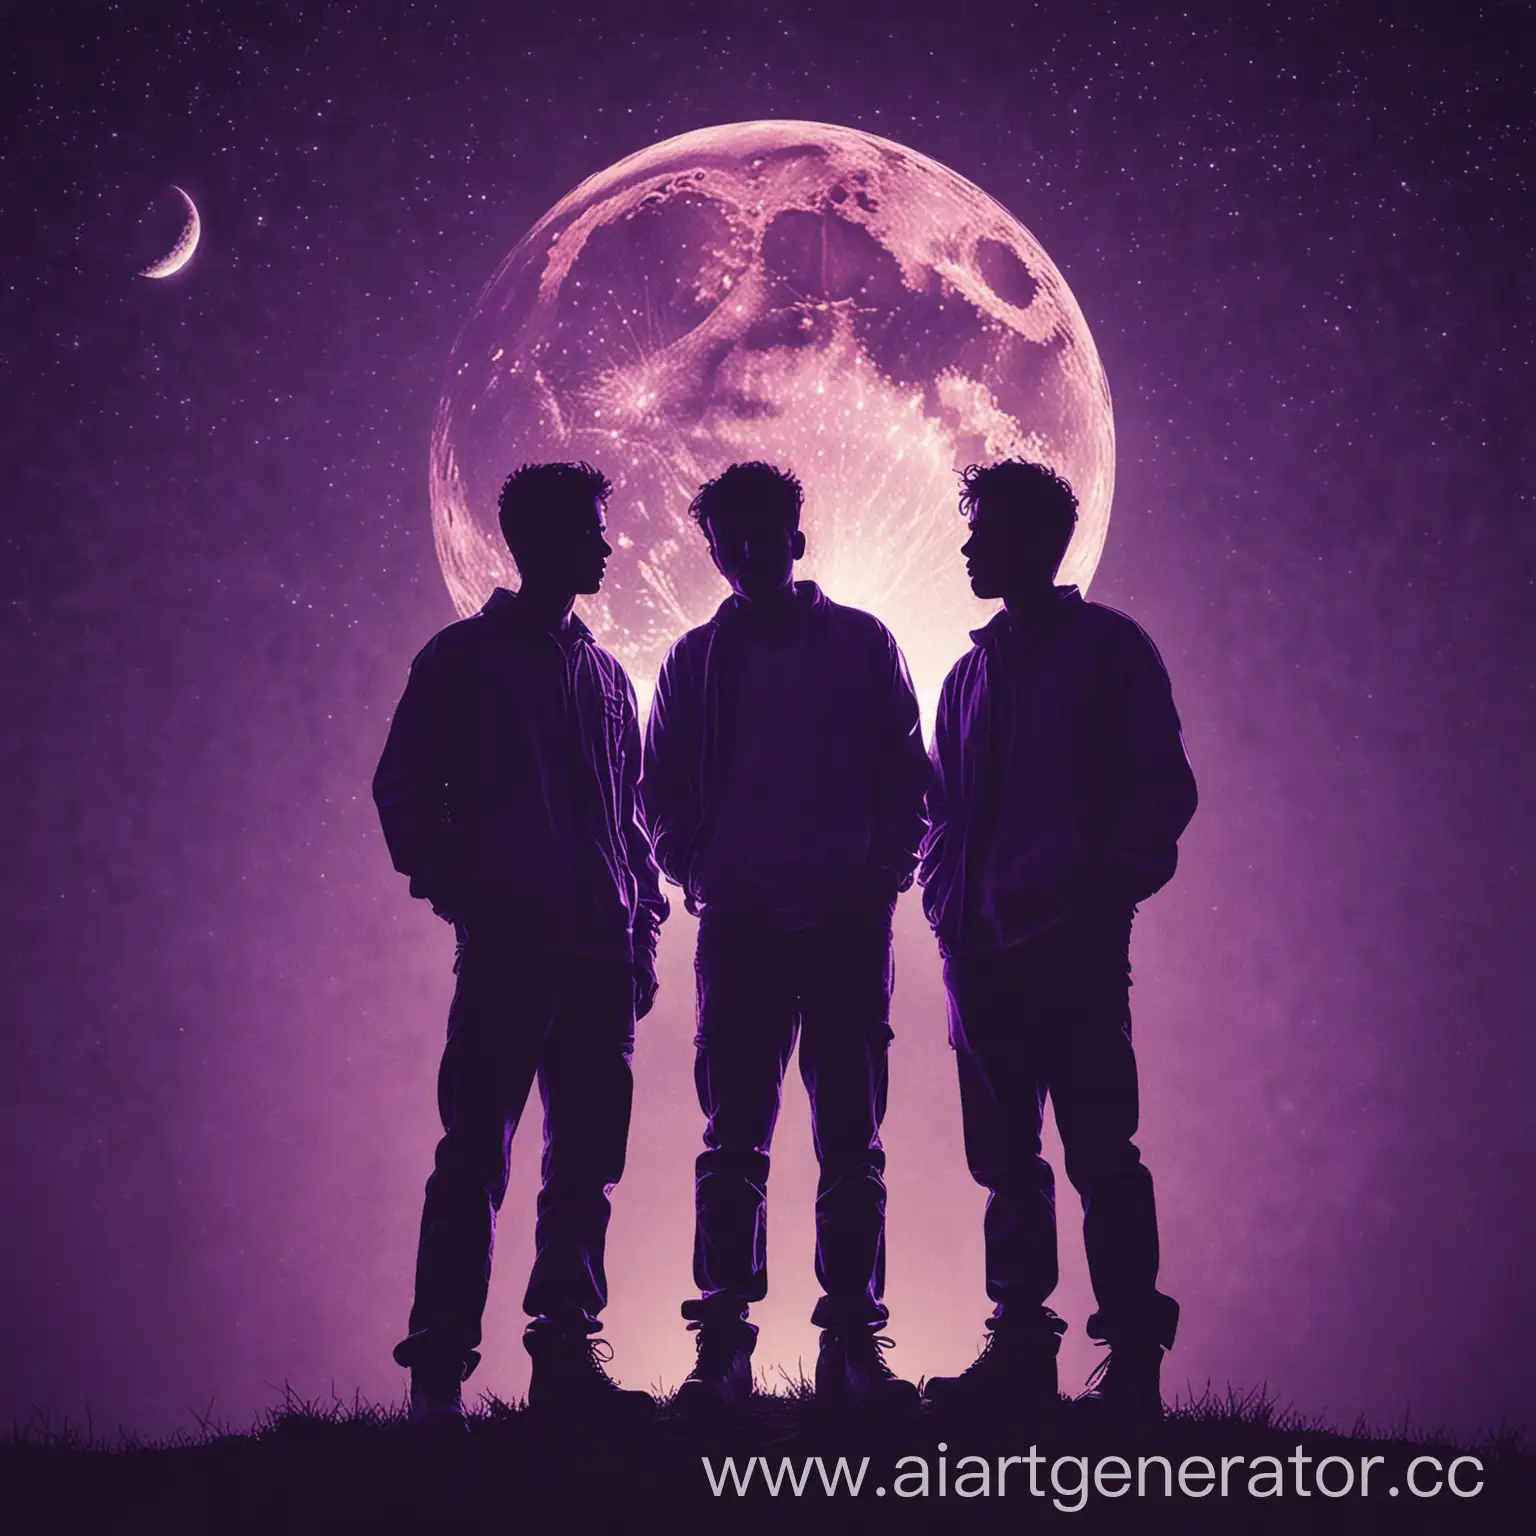 Silhouettes-of-Three-Guys-and-the-Moon-in-Purple-Album-Cover-for-Autotune